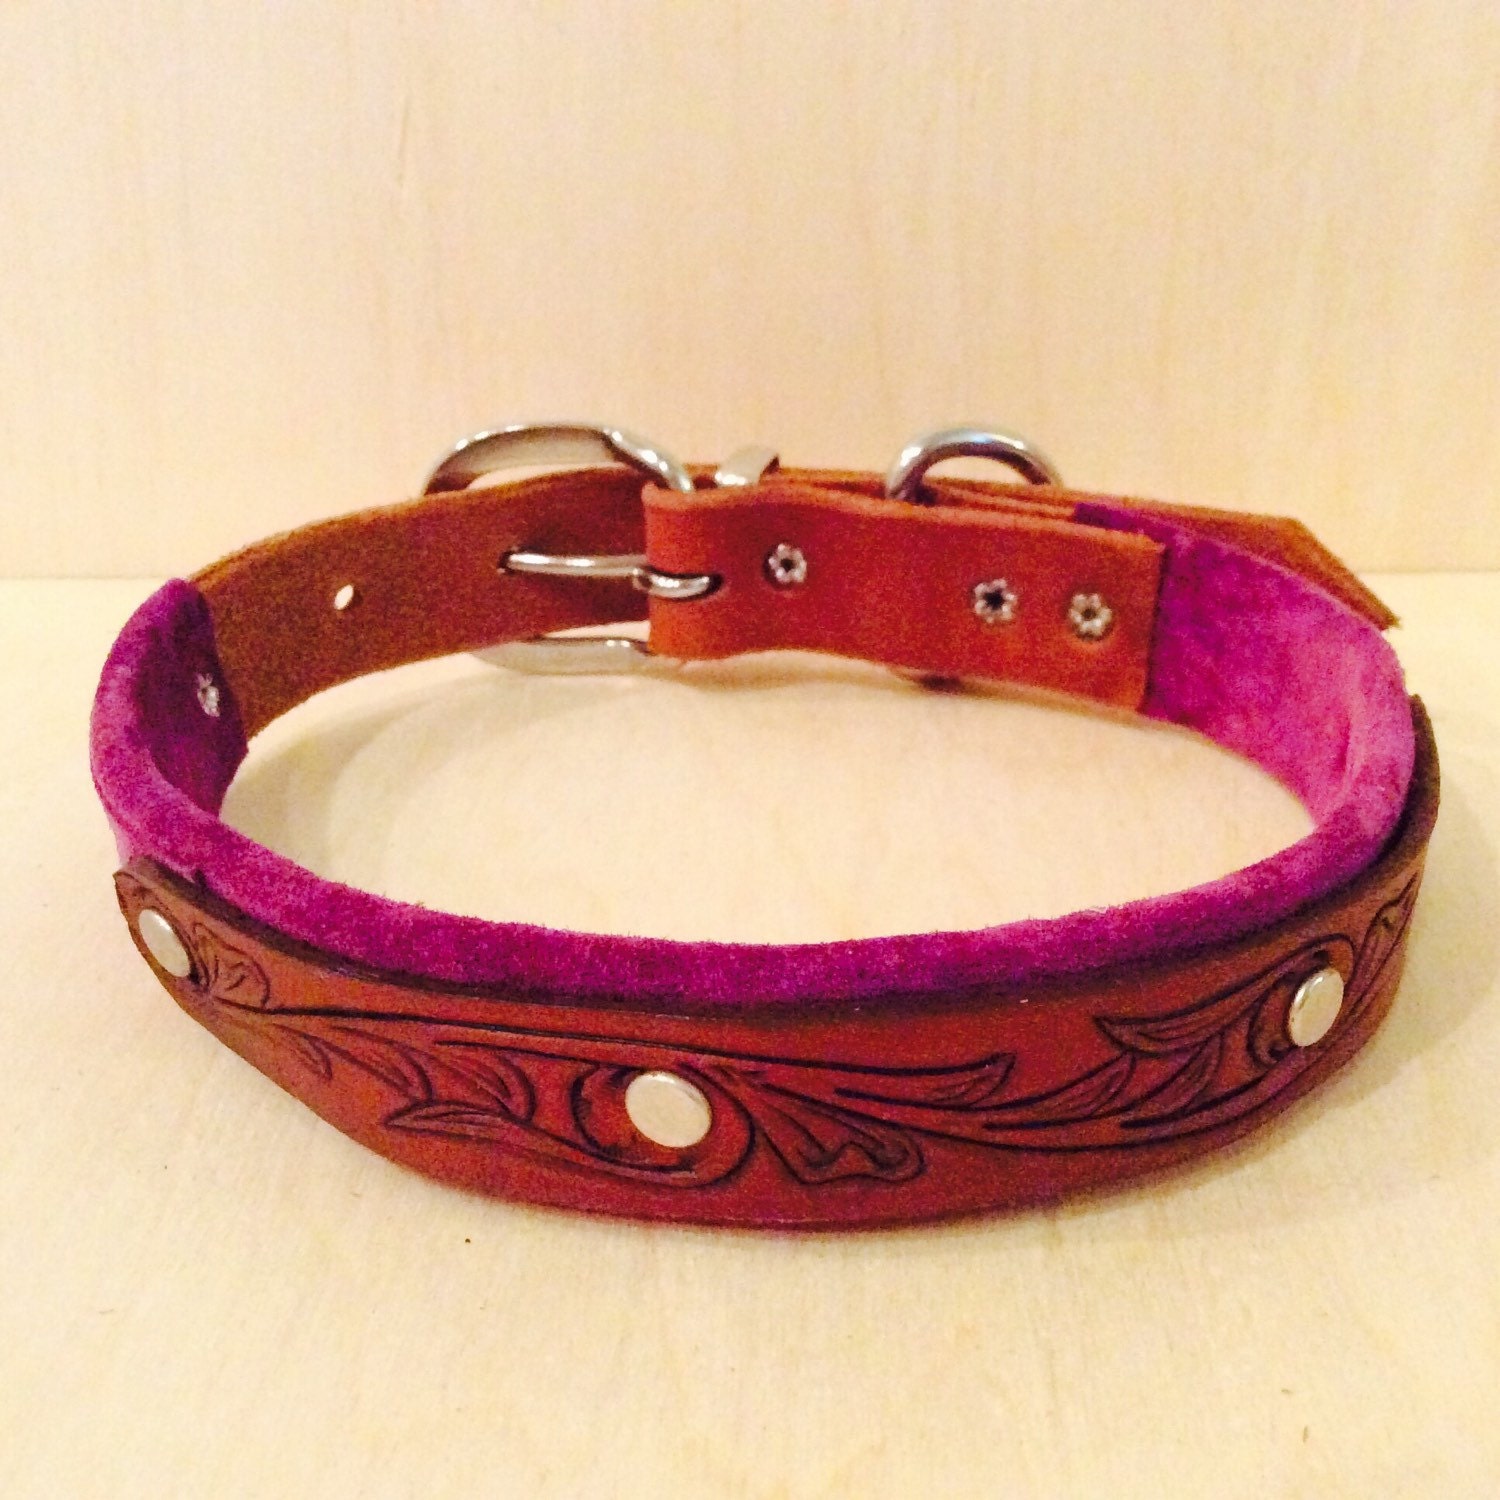 Handmade Leather Dog Collar with HandTooled Vine Pattern and